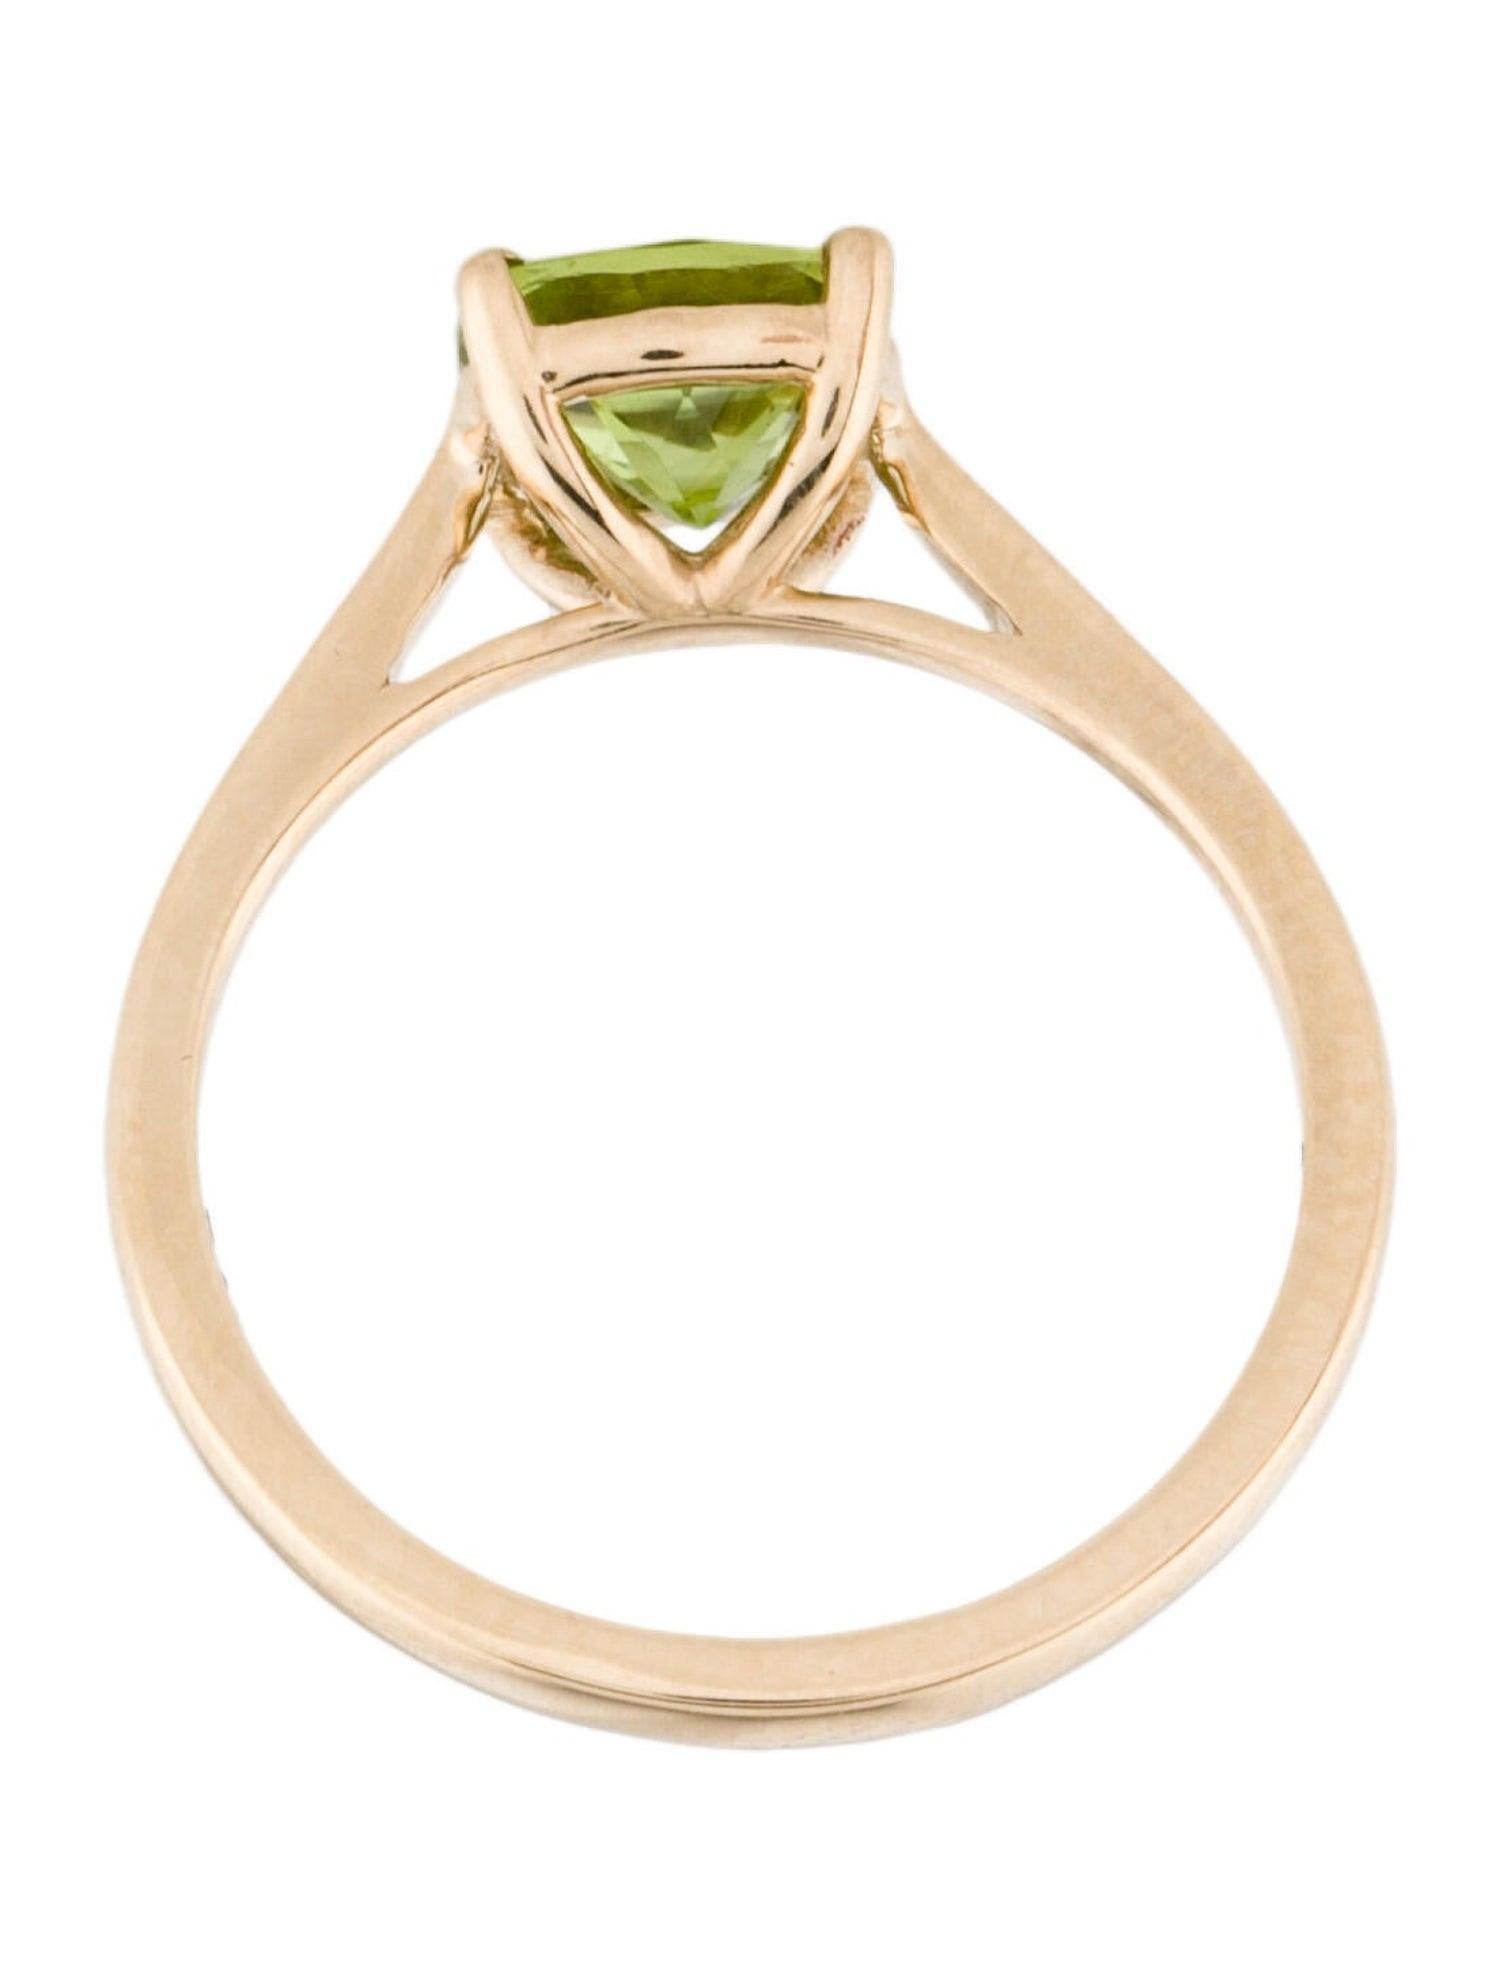 Stunning 14K Peridot Cocktail Ring 1.74ctw  Size 7  Elegant Statement Jewelry In New Condition For Sale In Holtsville, NY